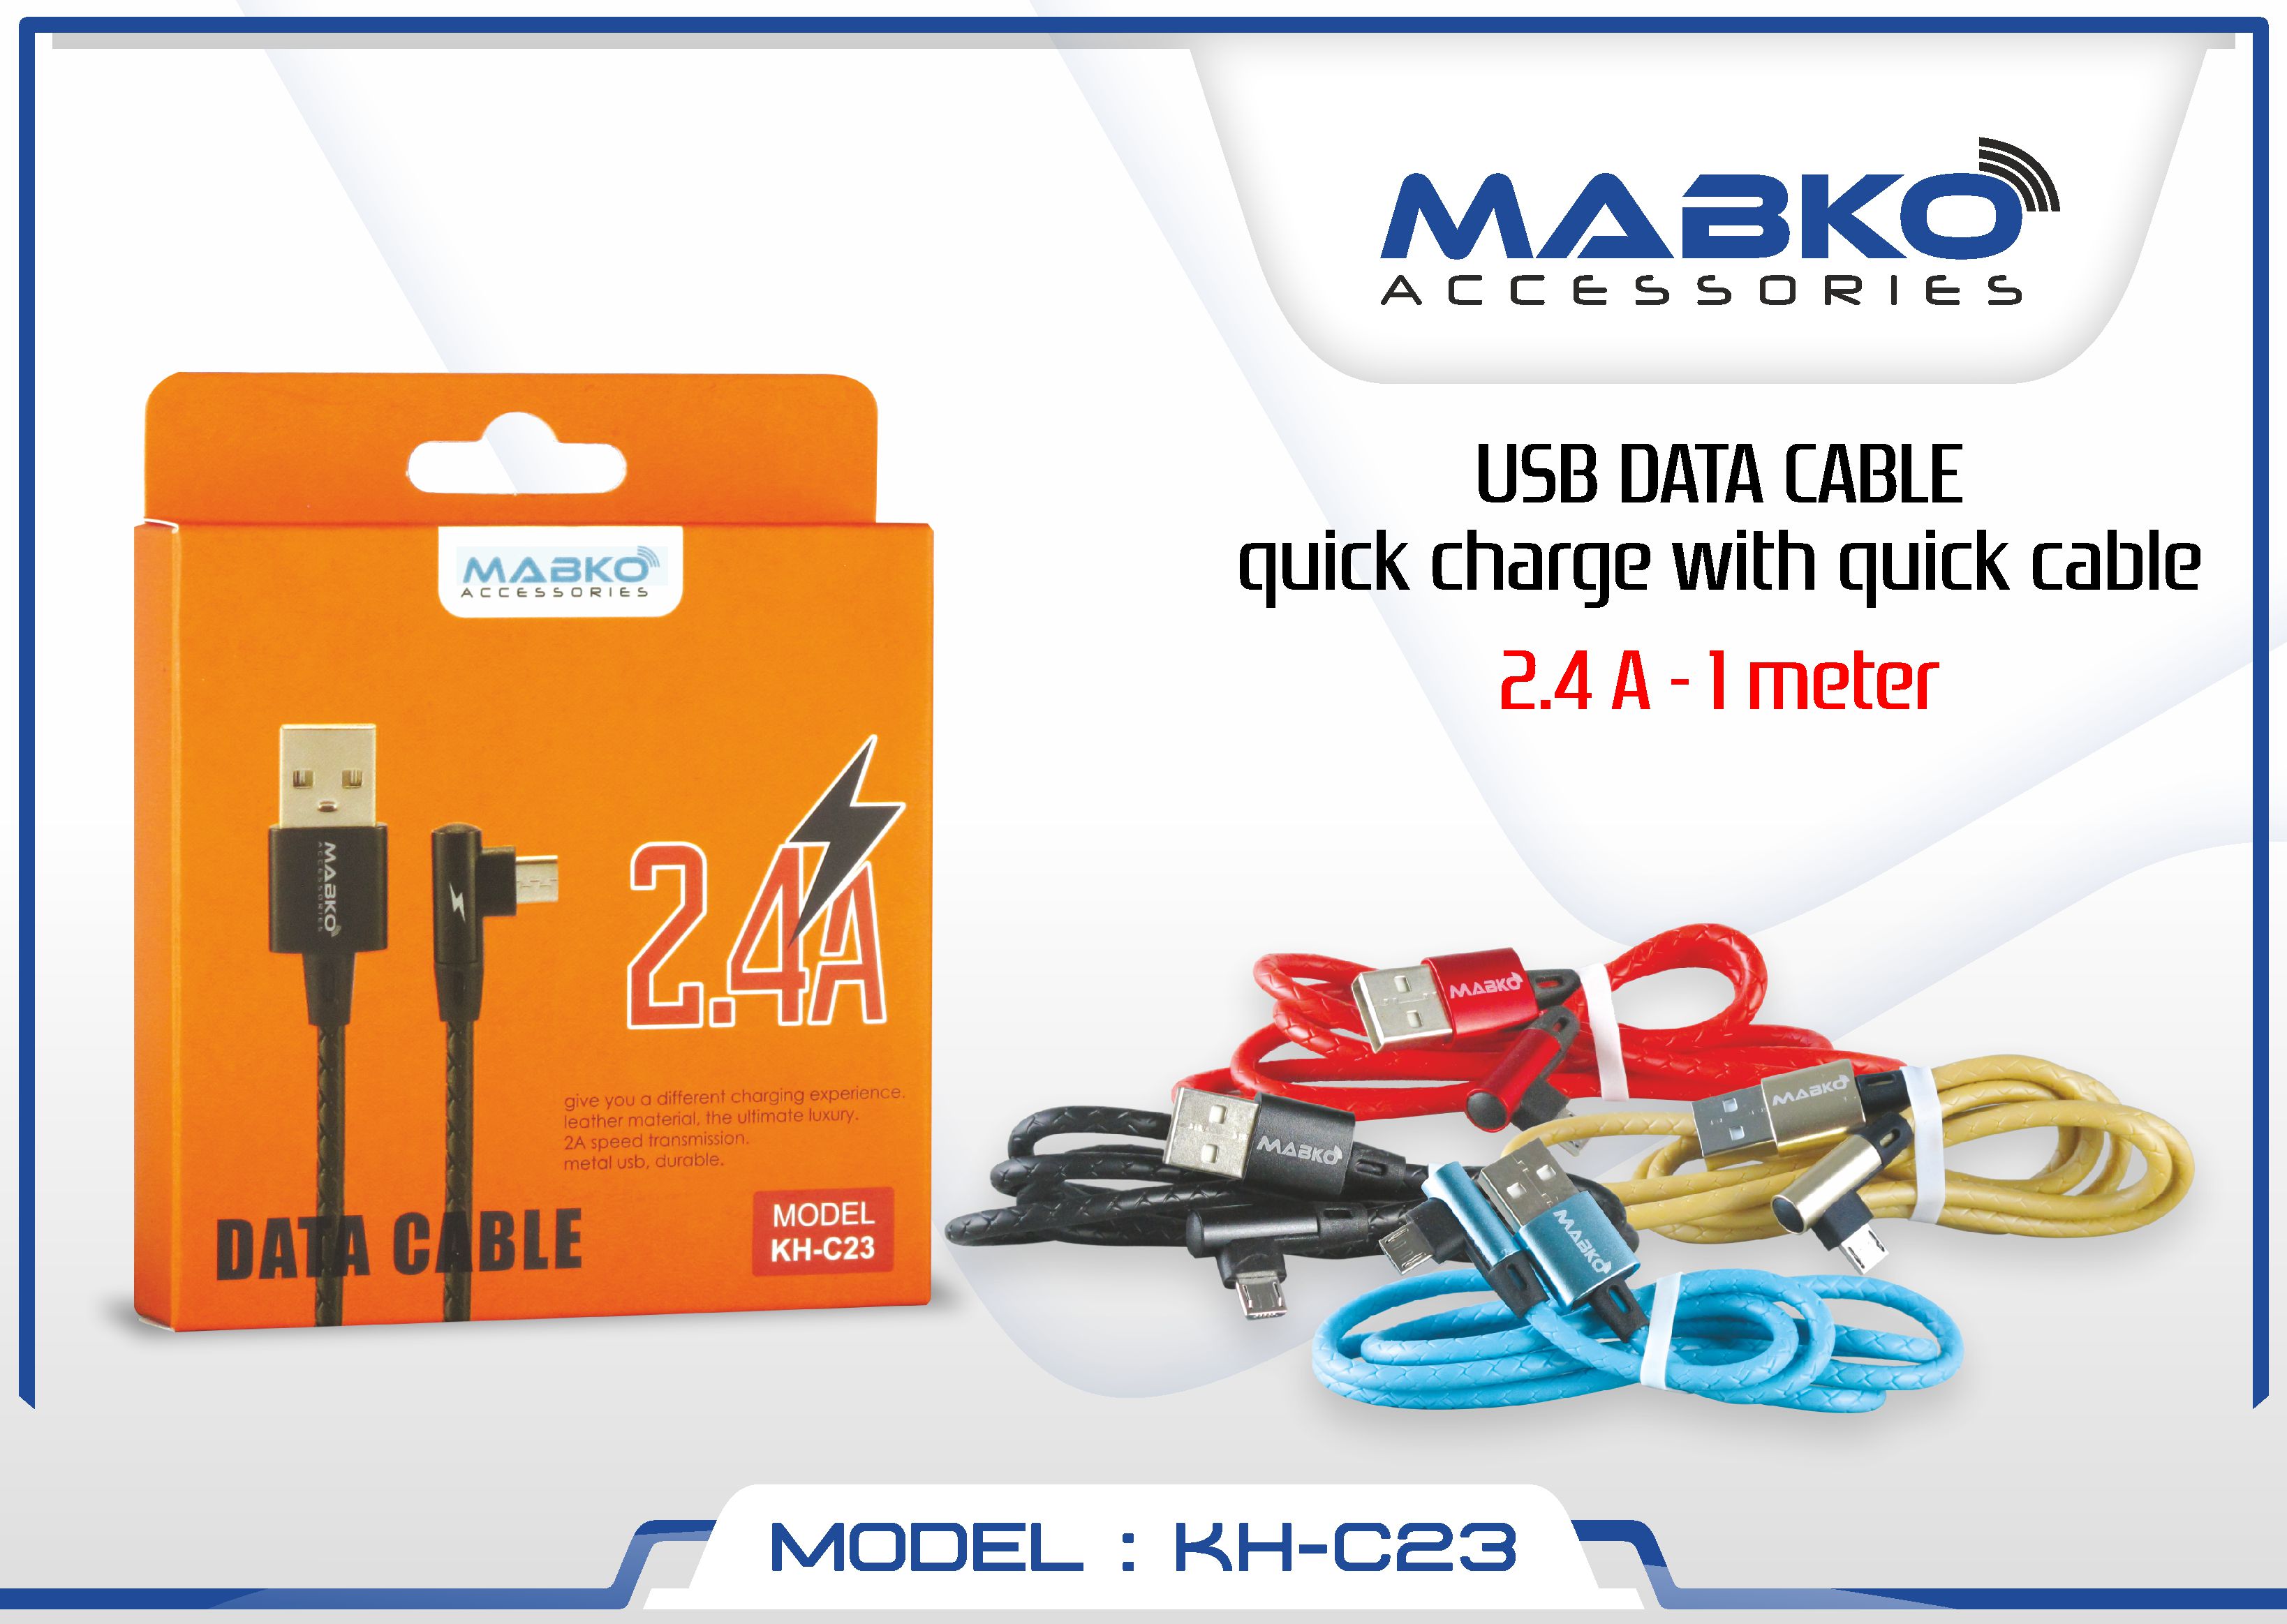 (MABKO CABLE KH-019  (TYPE C